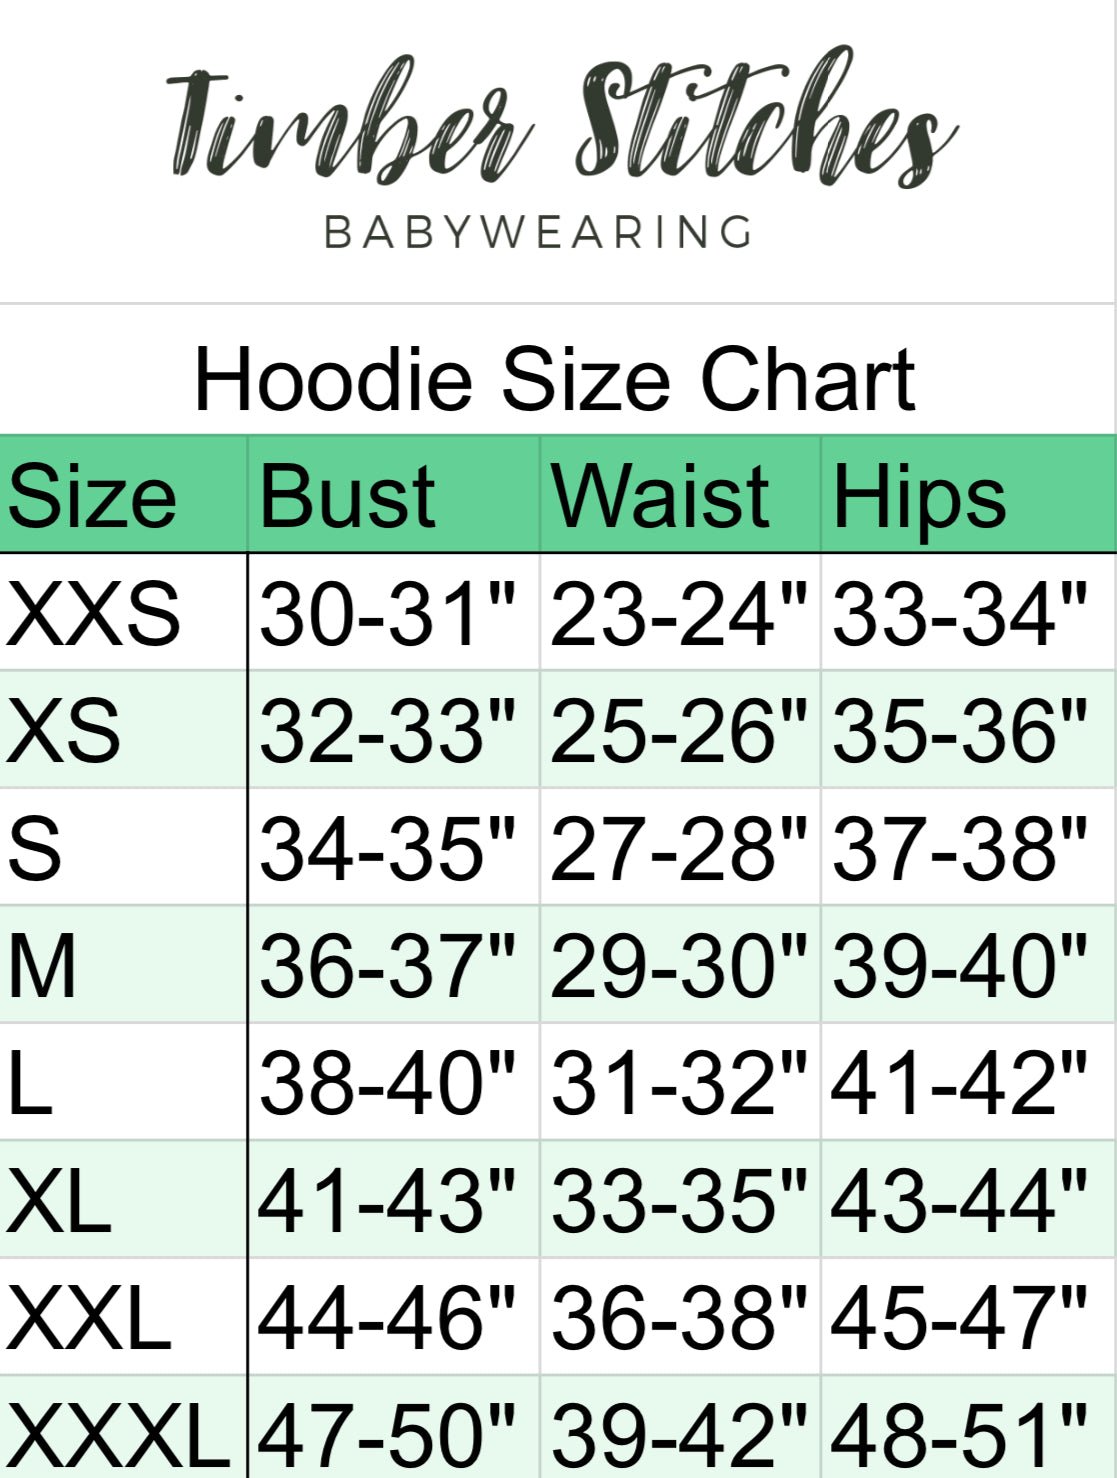 Quilted Triangles - Babywearing Hoodie - Timber Stitches